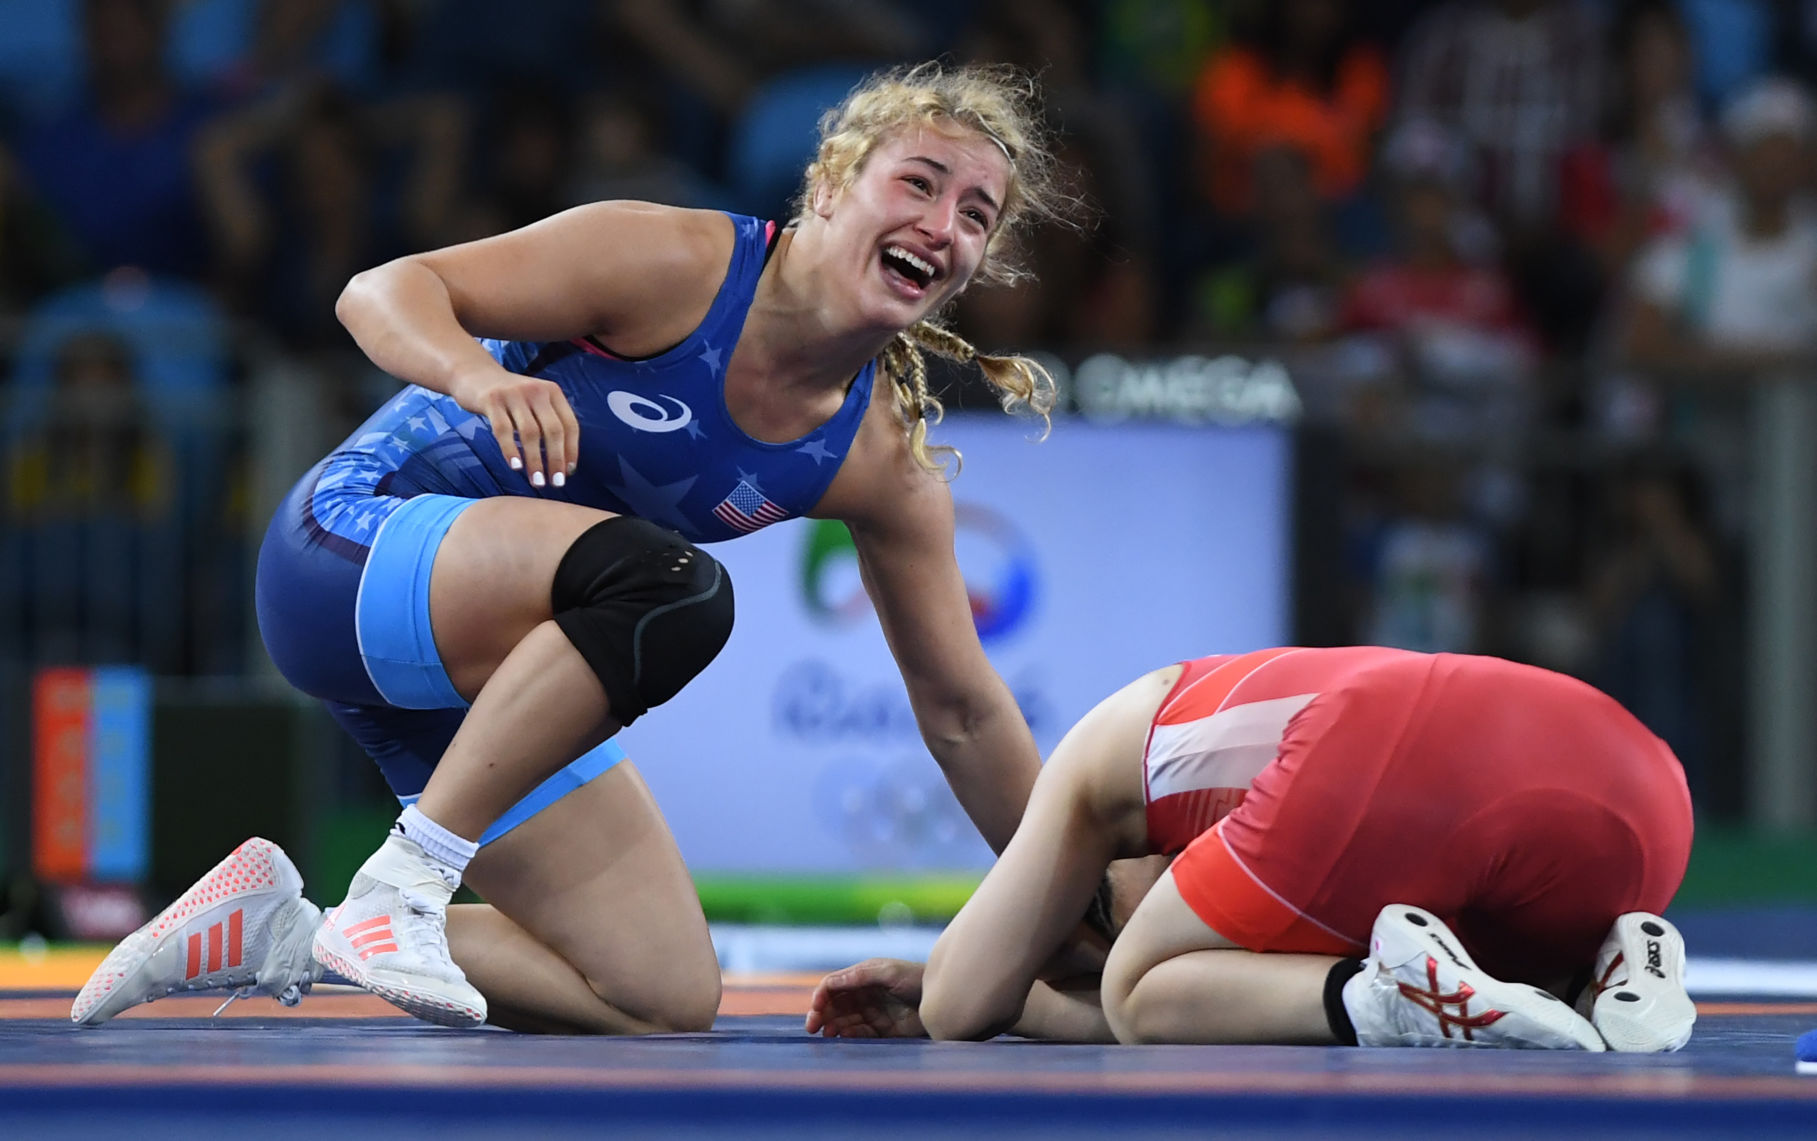 Maroulis beats legend, captures first womens freestyle wrestling gold for U.S